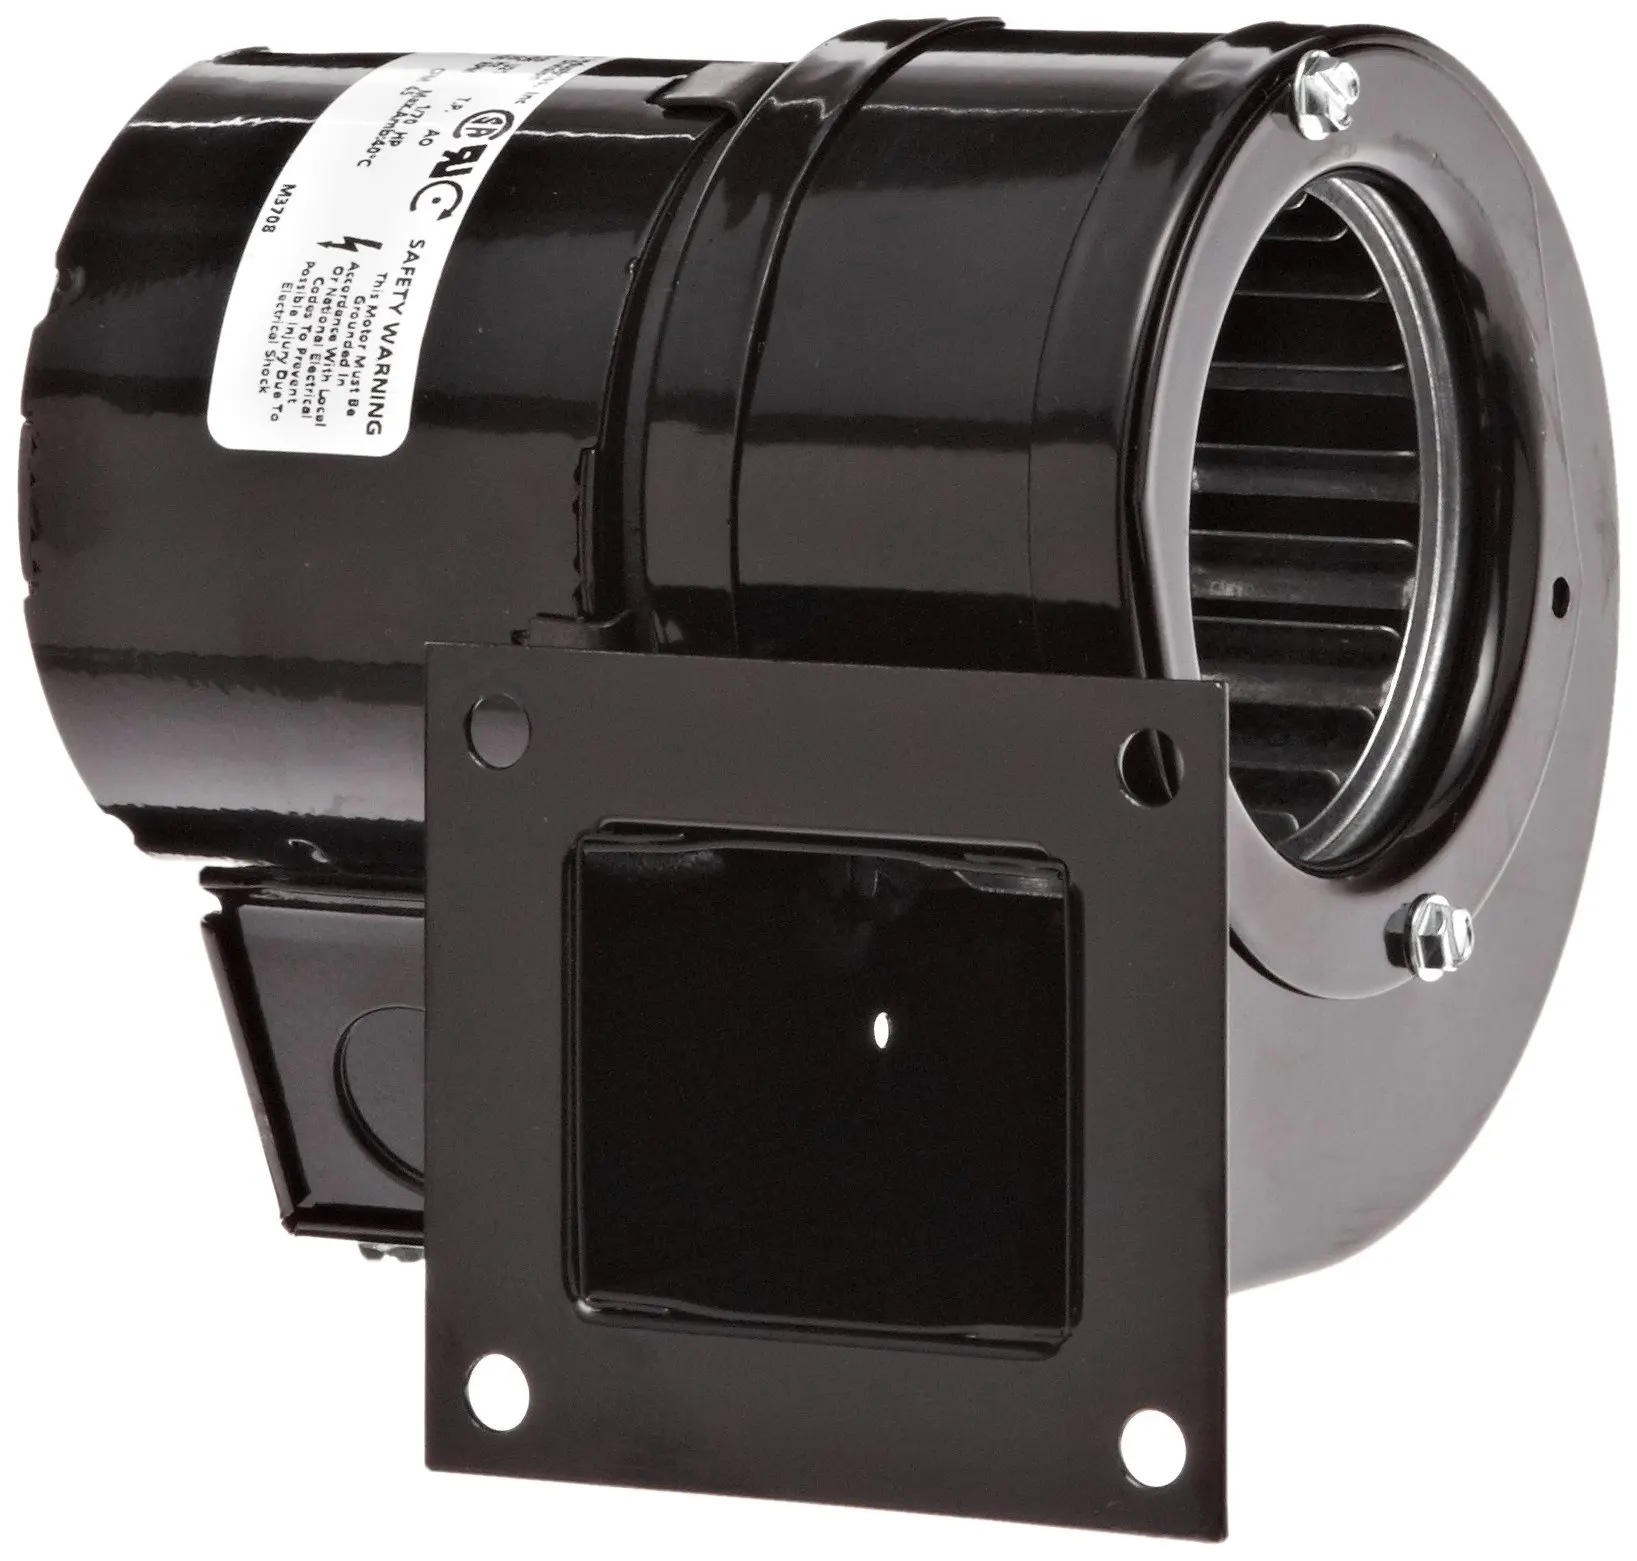 1,650 rpm 0.93 amps 230V Fasco B45227-2 Centrifugal Blower with Sleeve Bearing 50//60Hz